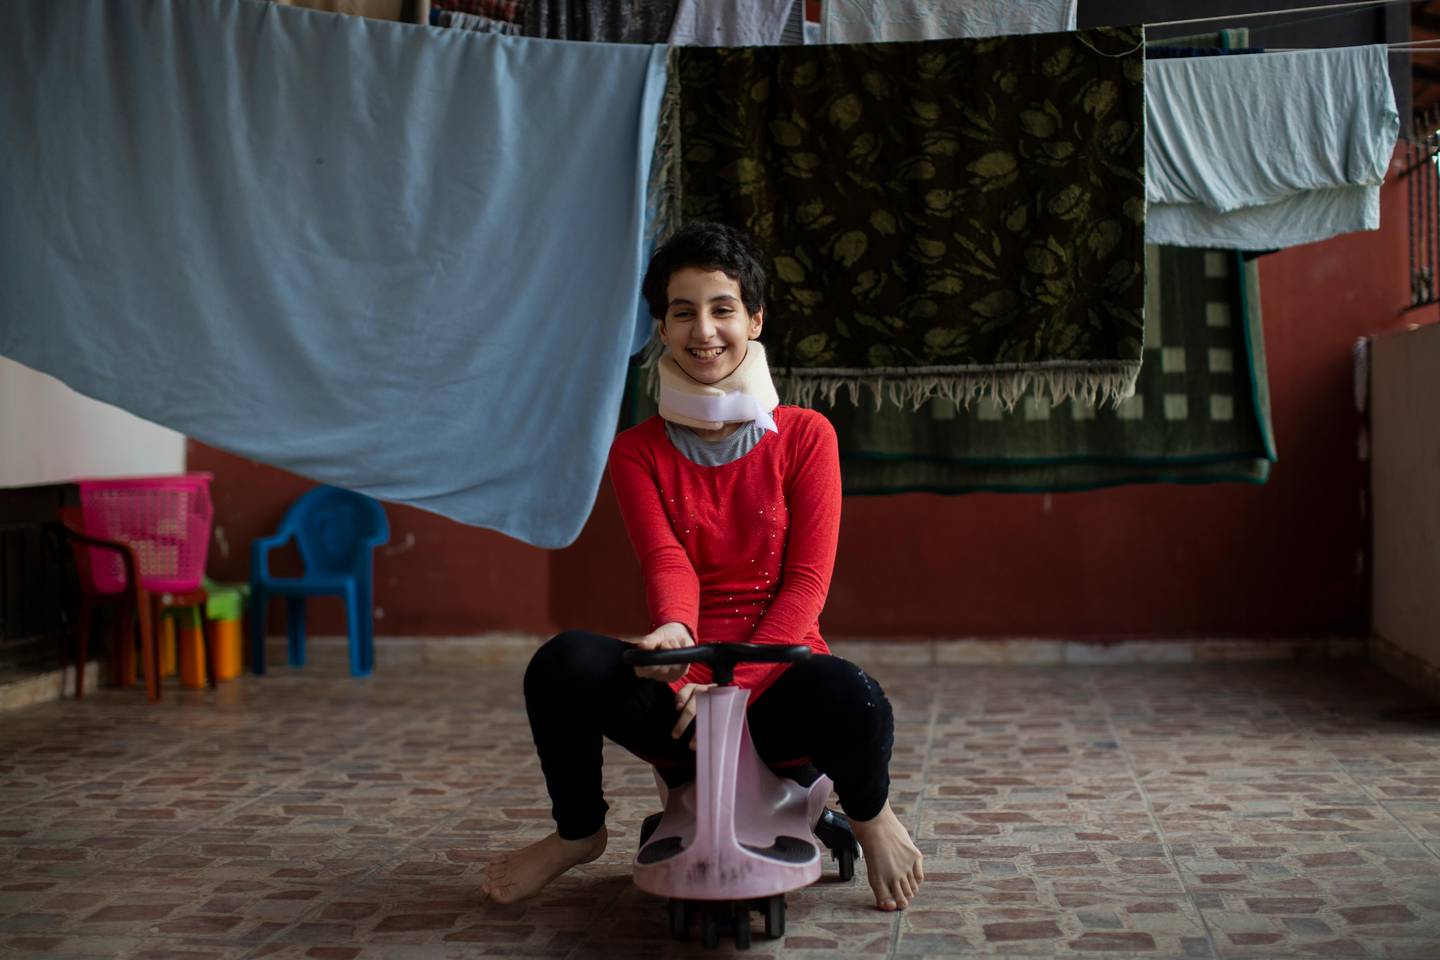 Hoda Kinno, 11, smiles as she plays in a temporary apartment in the coastal town of Jiyeh, south of Beirut, Lebanon, Tuesday, Sept. 22, 2020. The Kinno family from Syria's Aleppo region was devastated in the wake of the Aug. 4 explosion at the Beirut port -- Hoda suffered a broken neck and other injuries and her sister Sedra, 15, died in the explosion. (AP Photo/Hassan Ammar)